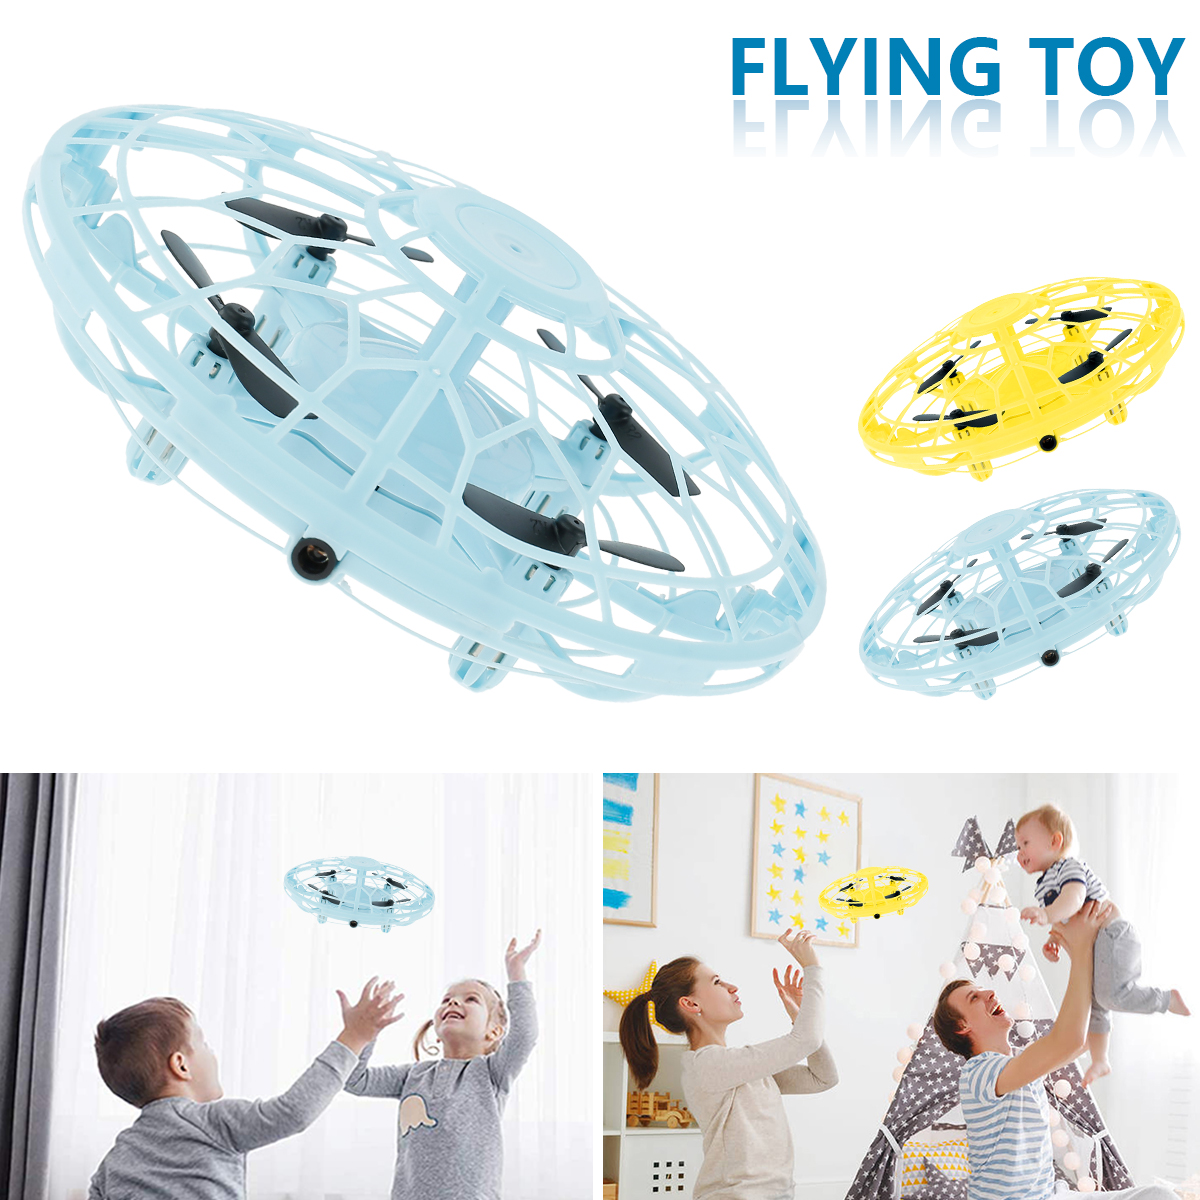 Mini Drone UFO Flying Aircraft Toy Light Up Flying Ball Drone Cool Hand Controlled Drone with 3 Side Motion Sensors USB Charger